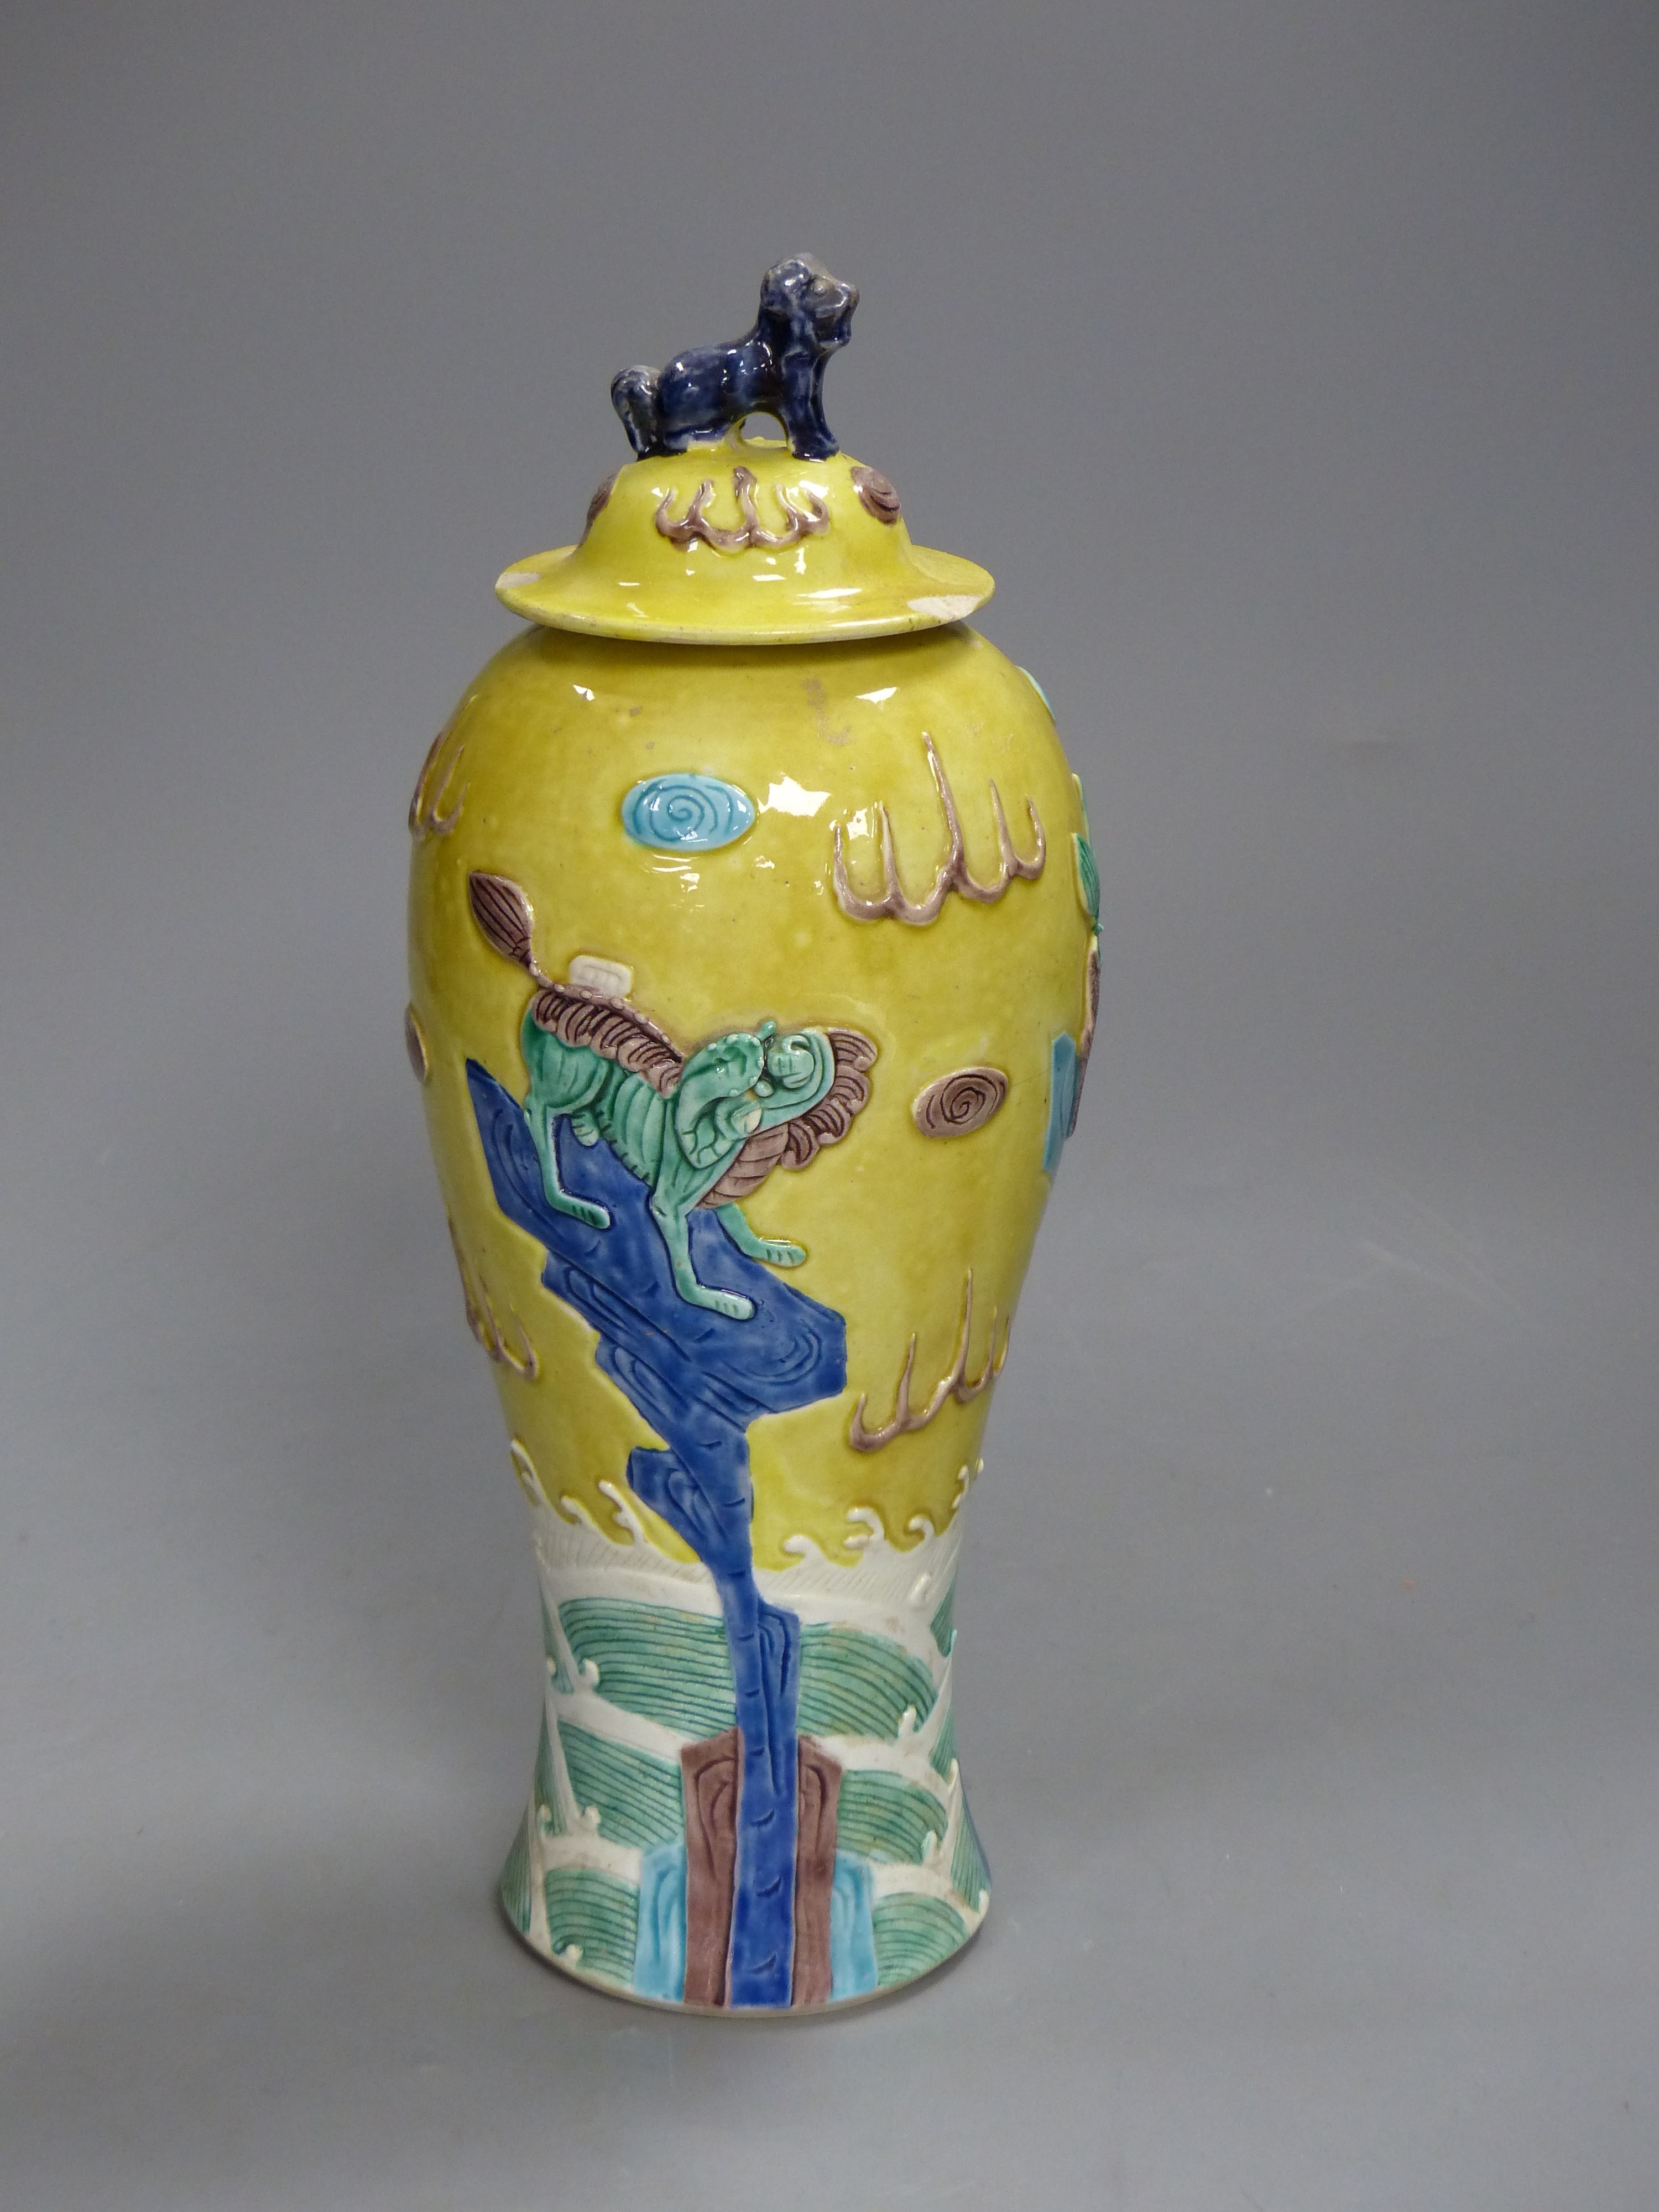 A Chinese polychrome glazed vase, Wang Bingrong seal mark, height 29cm, neck reduced